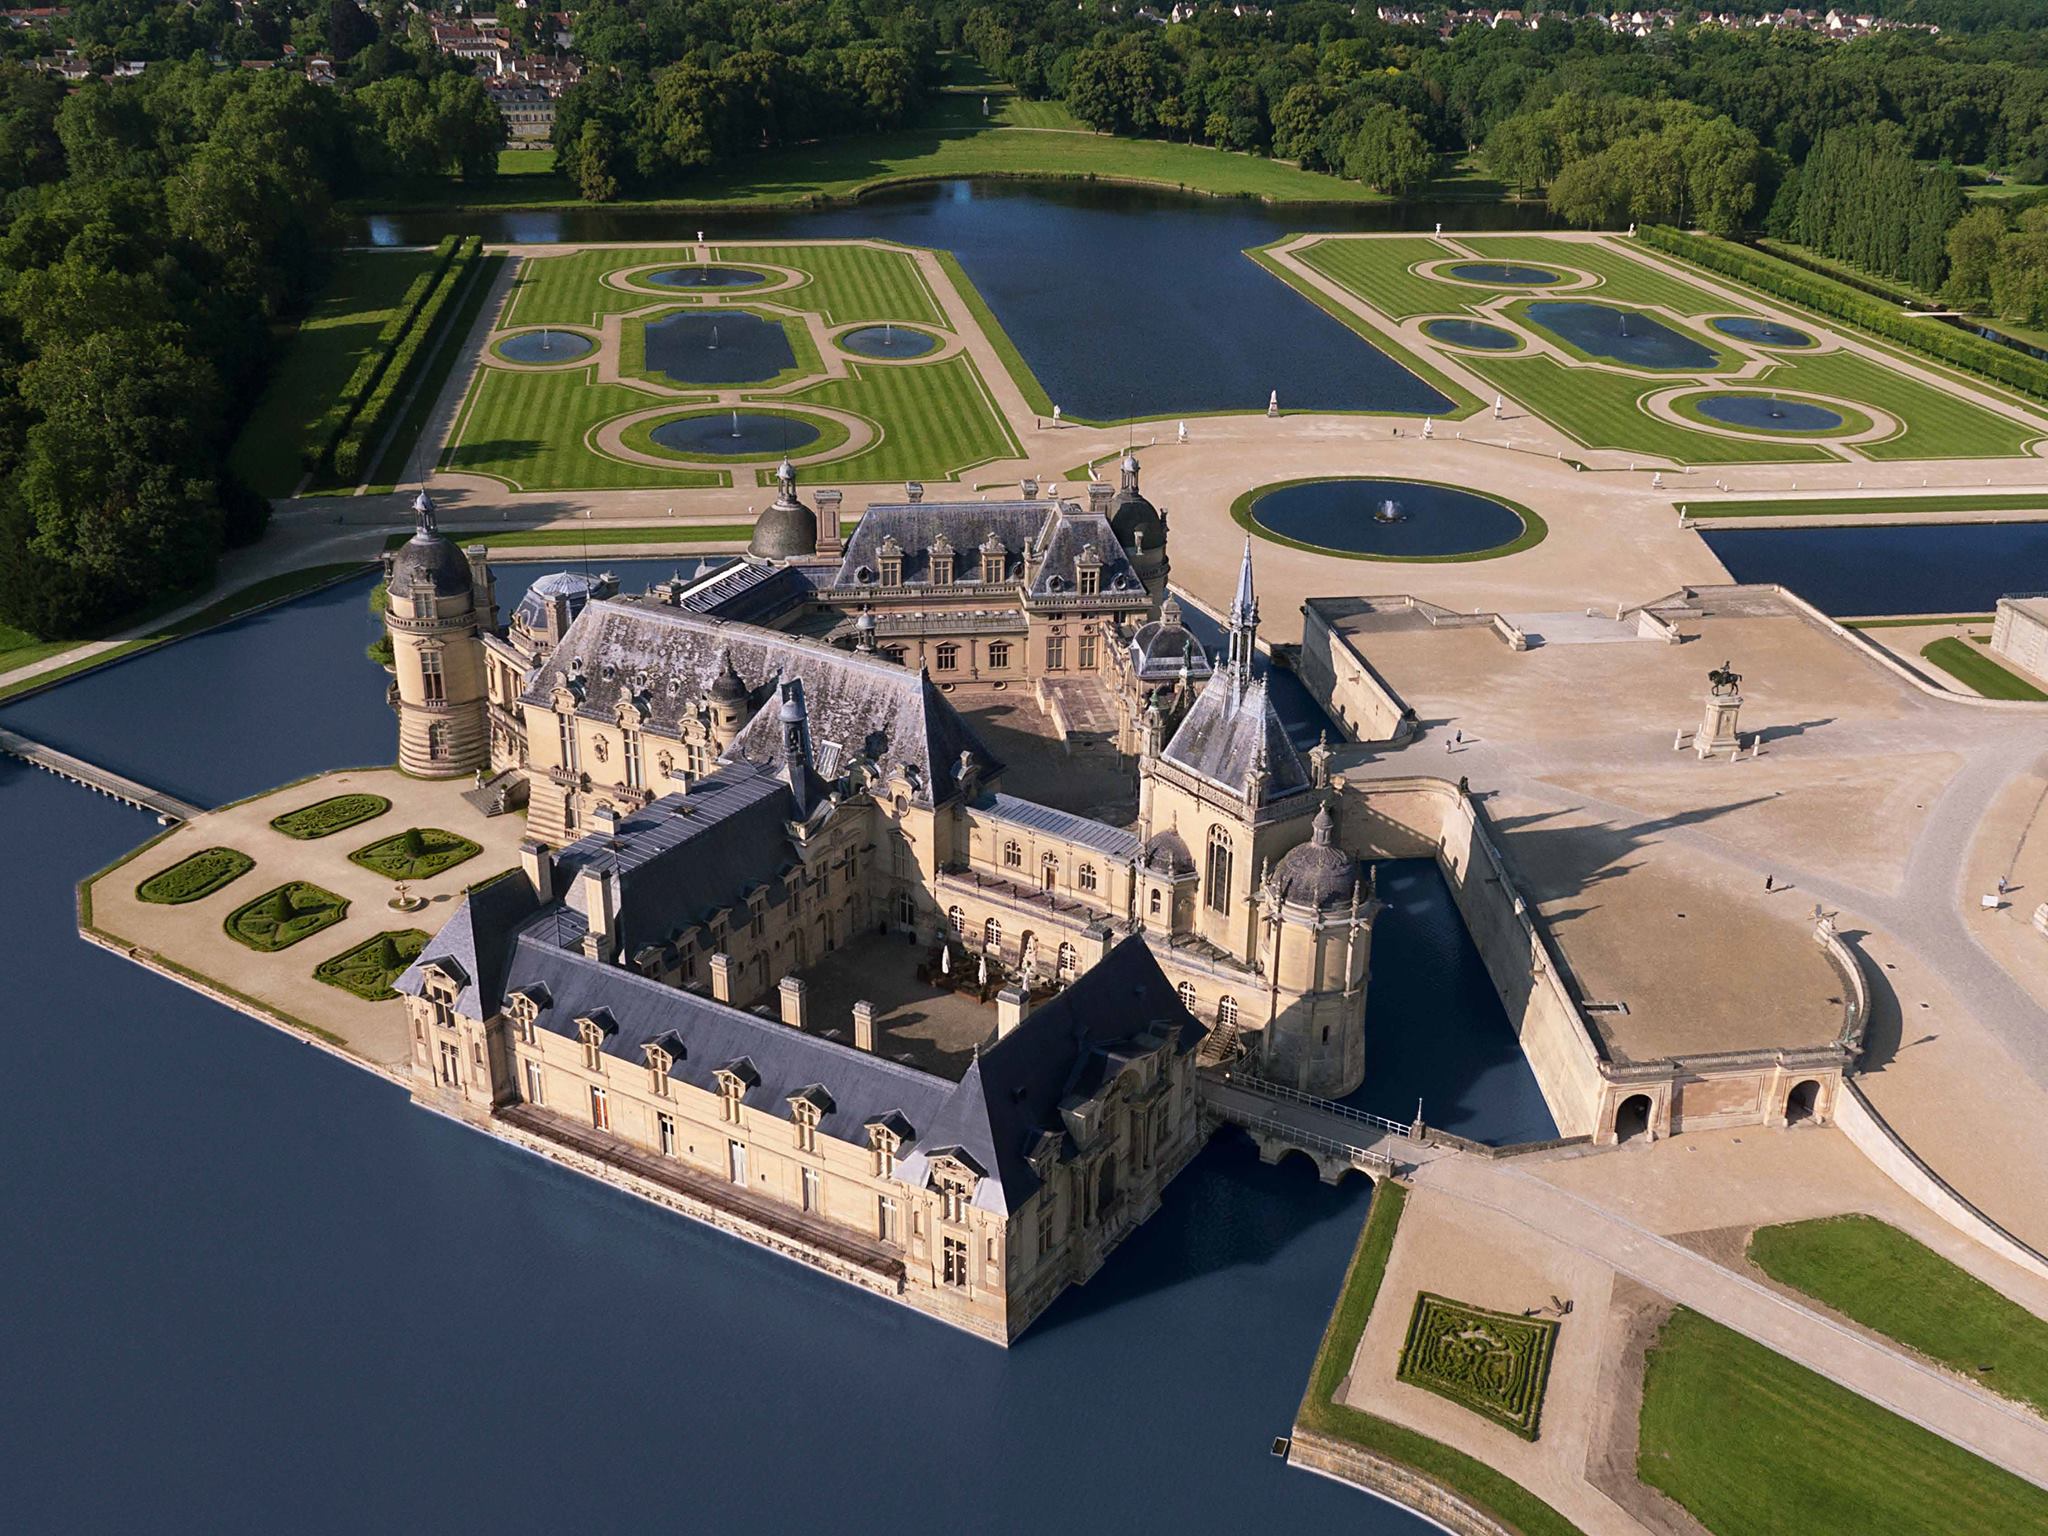 What to do at Chateau de Chantilly France - MelbTravel